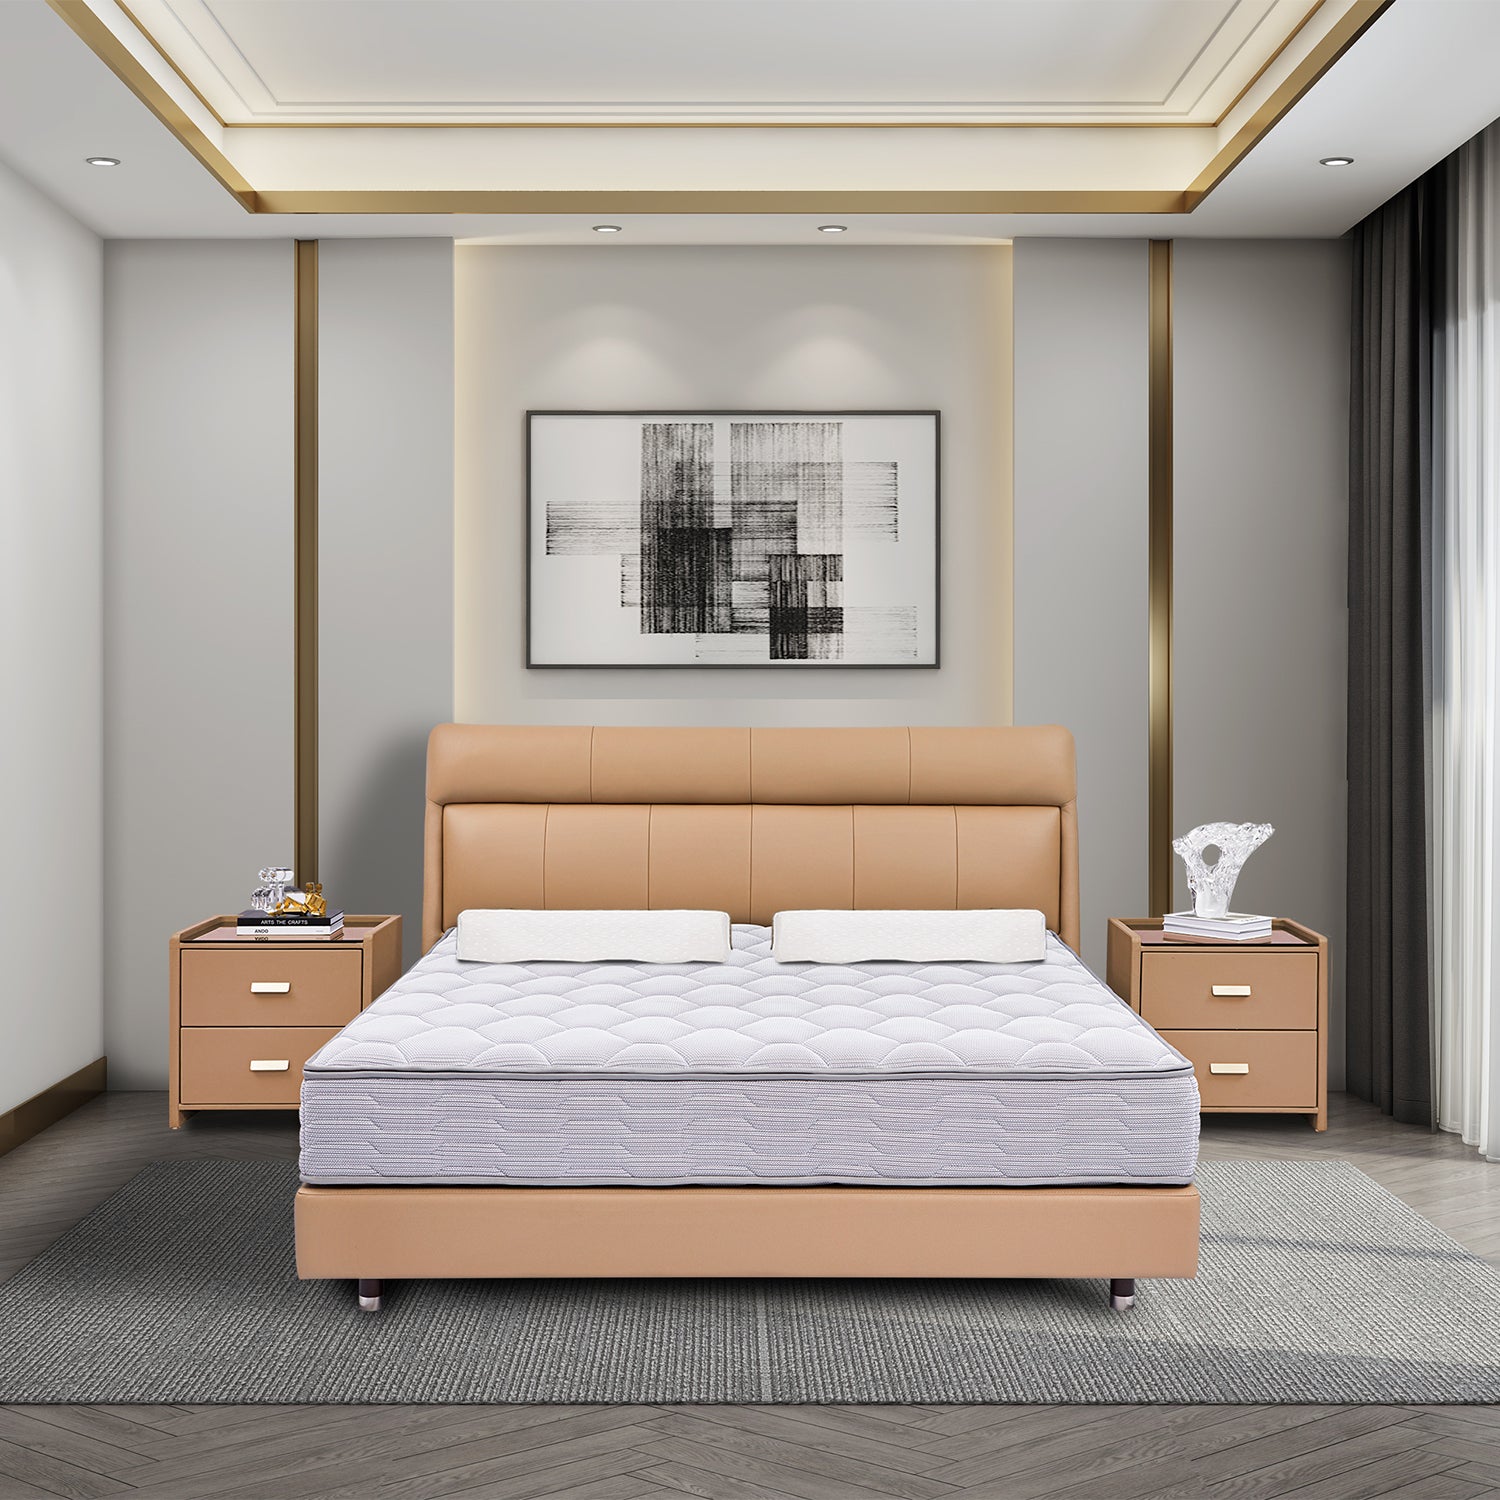 Modern bedroom featuring a tan leather bed frame with a white mattress, abstract black and white artwork above the bed, matching tan nightstands with decorative items, and a neutral color palette with gold accents.